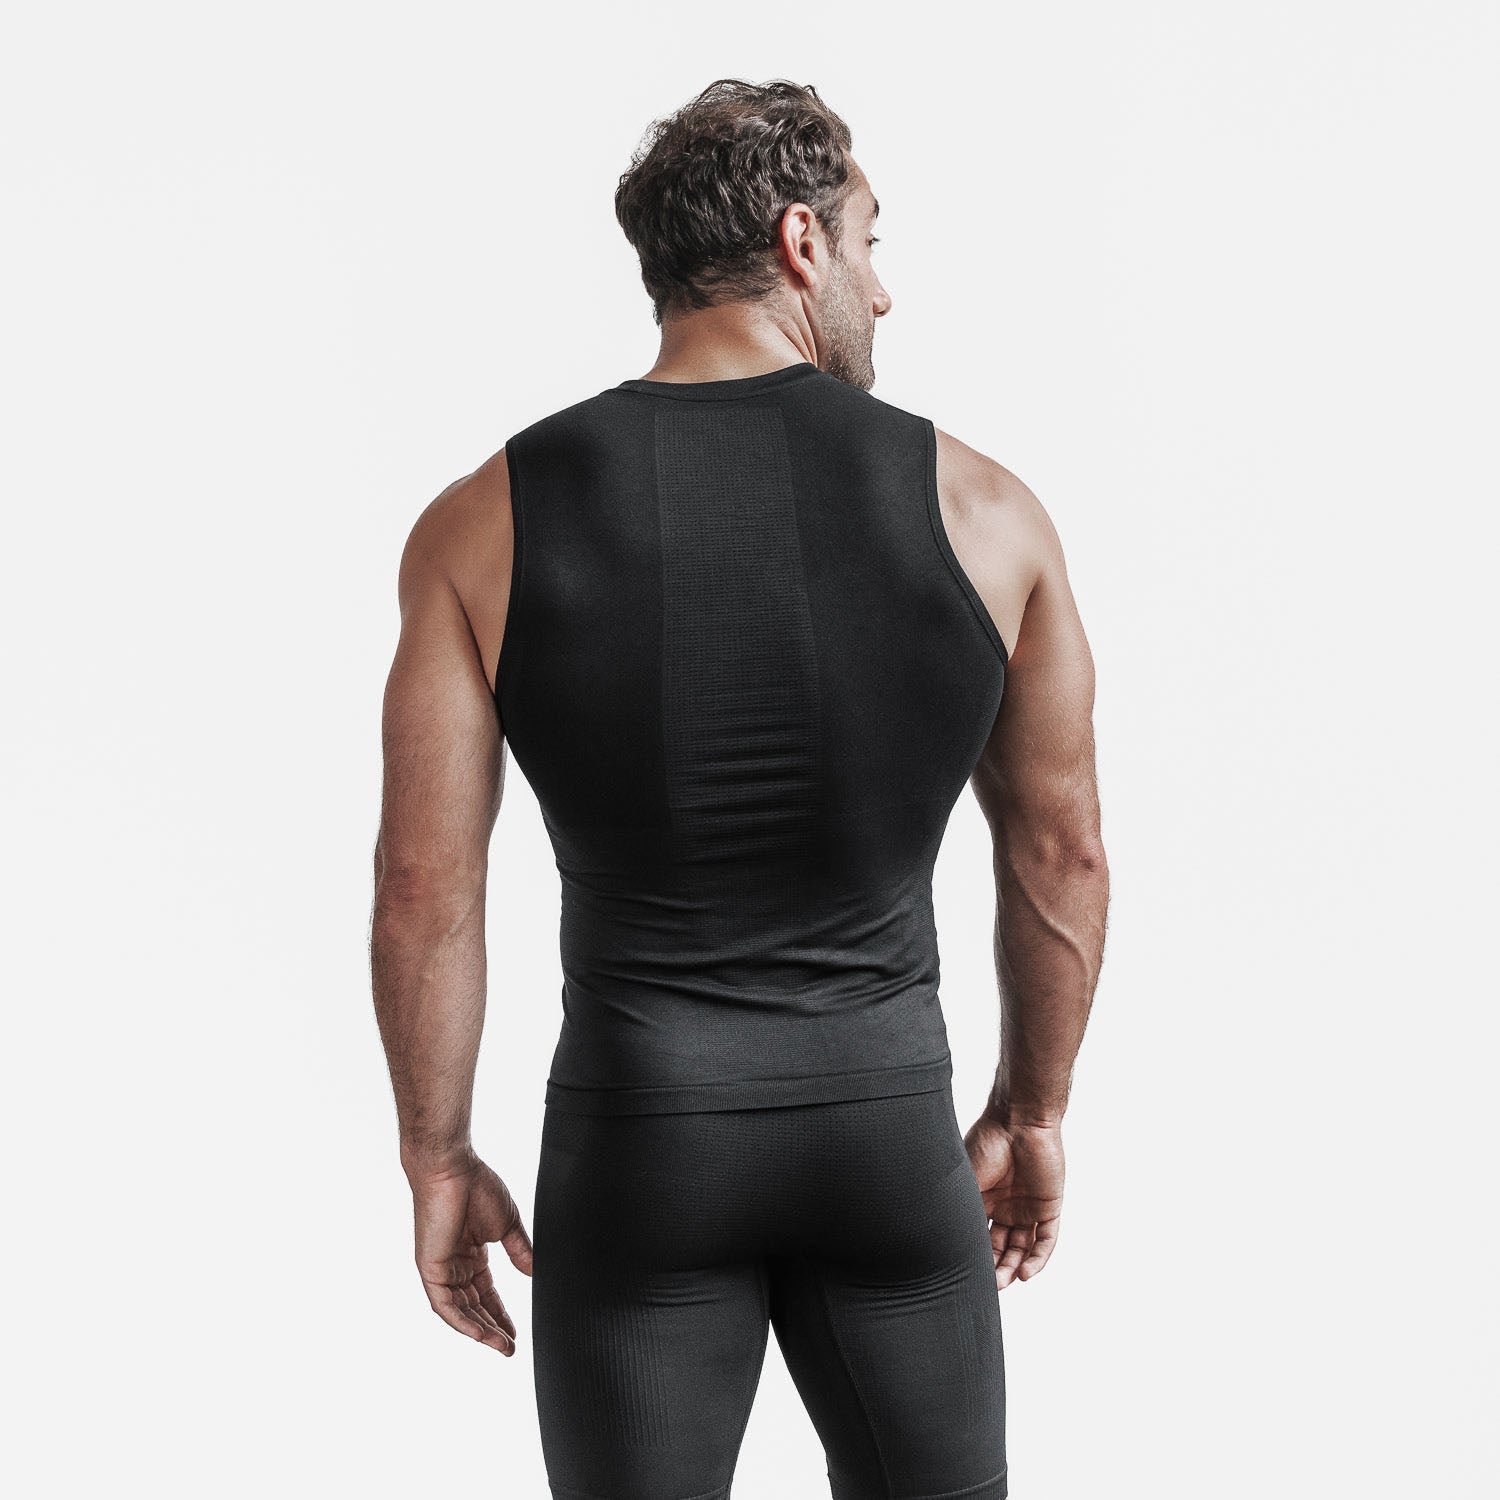  New Compression Shirts for Men 1/2 One Arm Long Sleeve